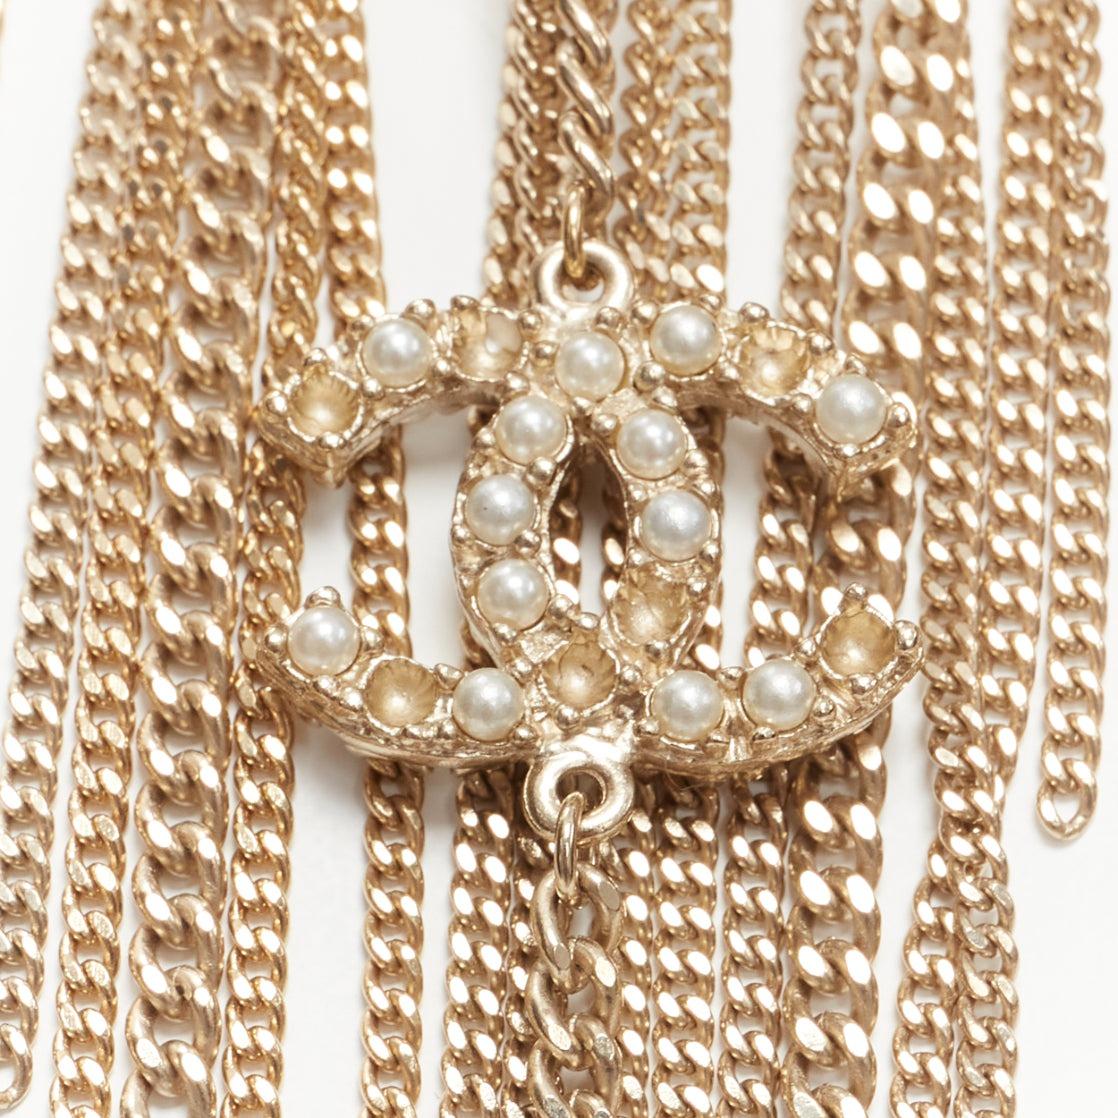 rare CHANEL 10P faux pearl CC logo charm chain fringe wrap necklace
Reference: TGAS/D00678
Brand: Chanel
Designer: Karl Lagerfeld
Collection: 10P
Material: Faux Pearl, Metal
Color: Gold, Pearl
Pattern: Solid
Closure: Lobster Clasp
Lining: Gold